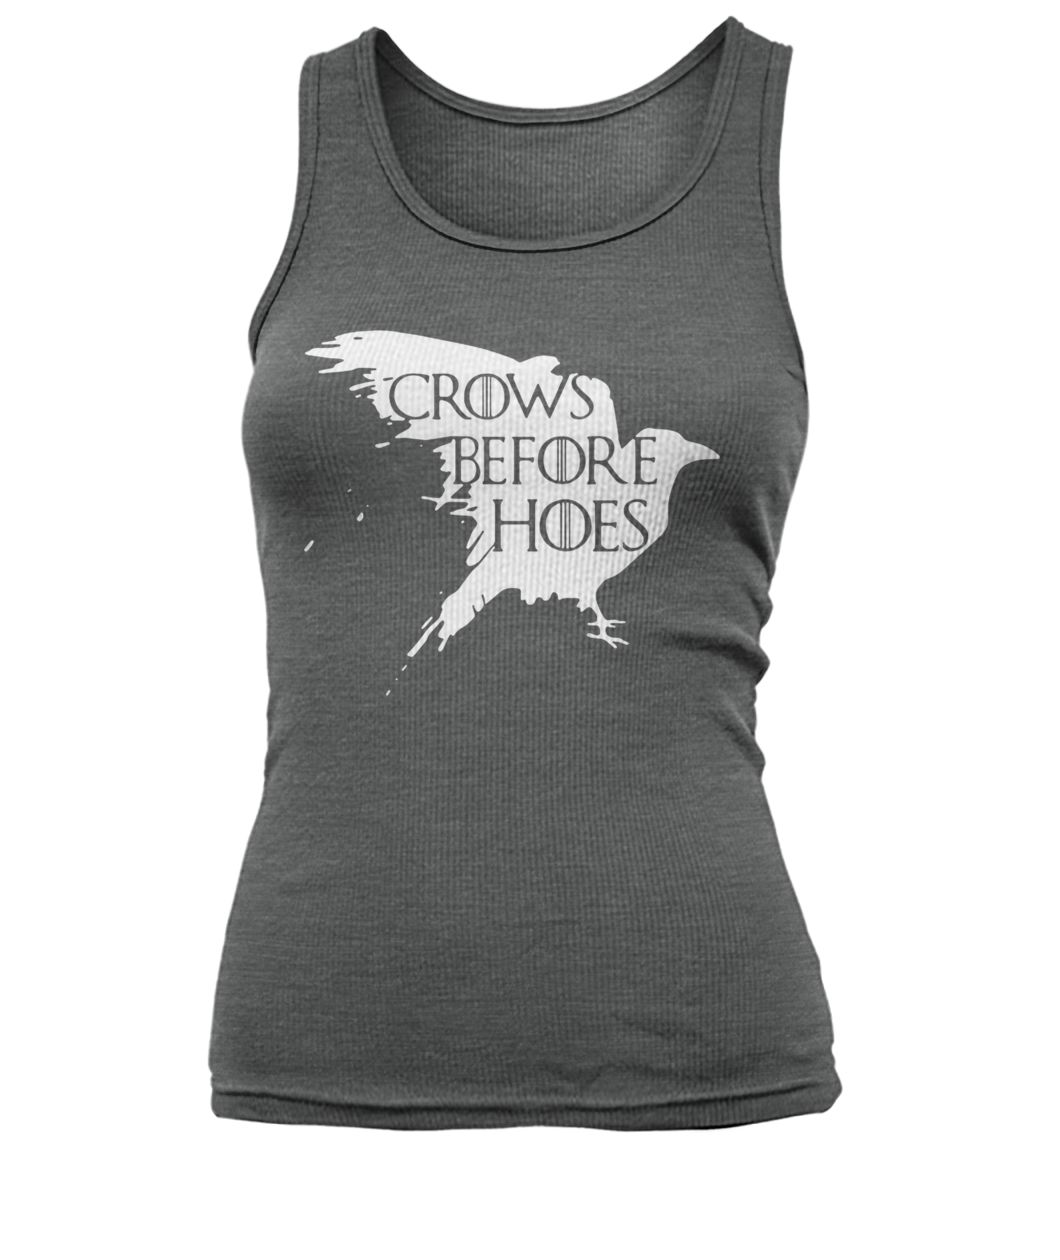 Game of thrones crows before hoes women's tank top